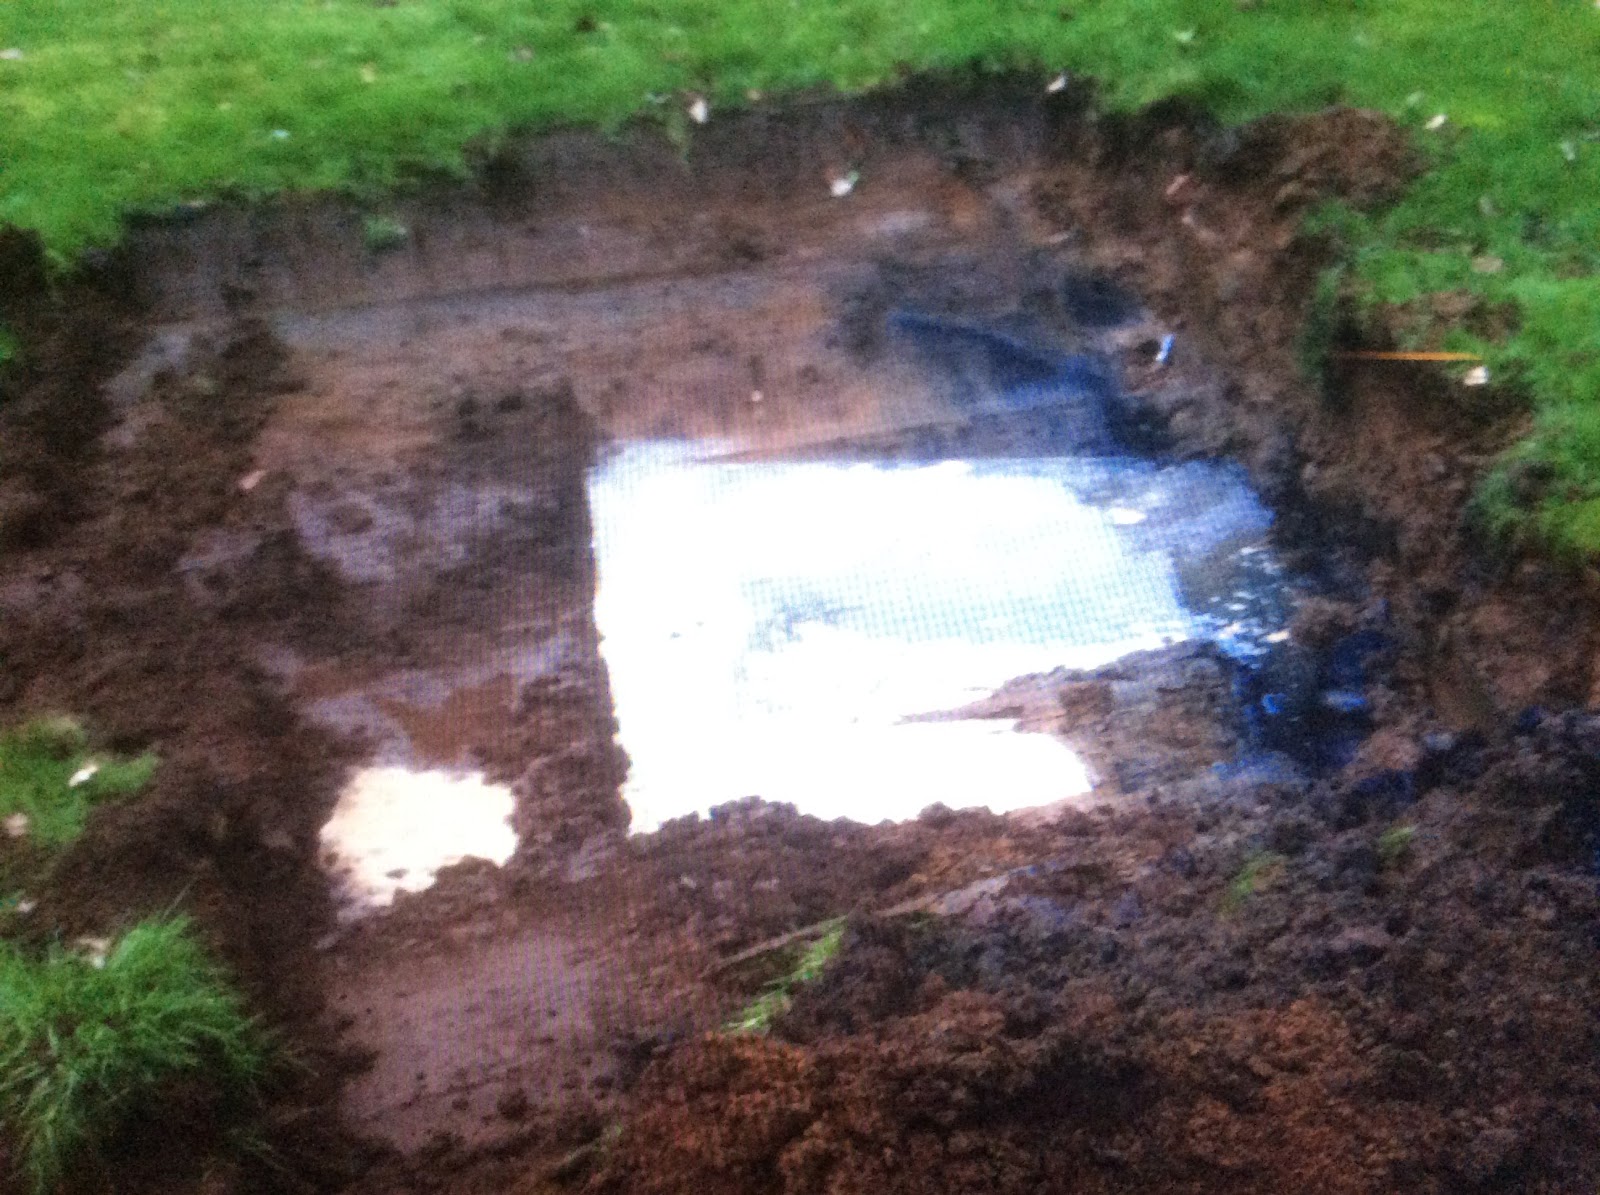 This image shows a private sewage systems soak away clogged or ponding.